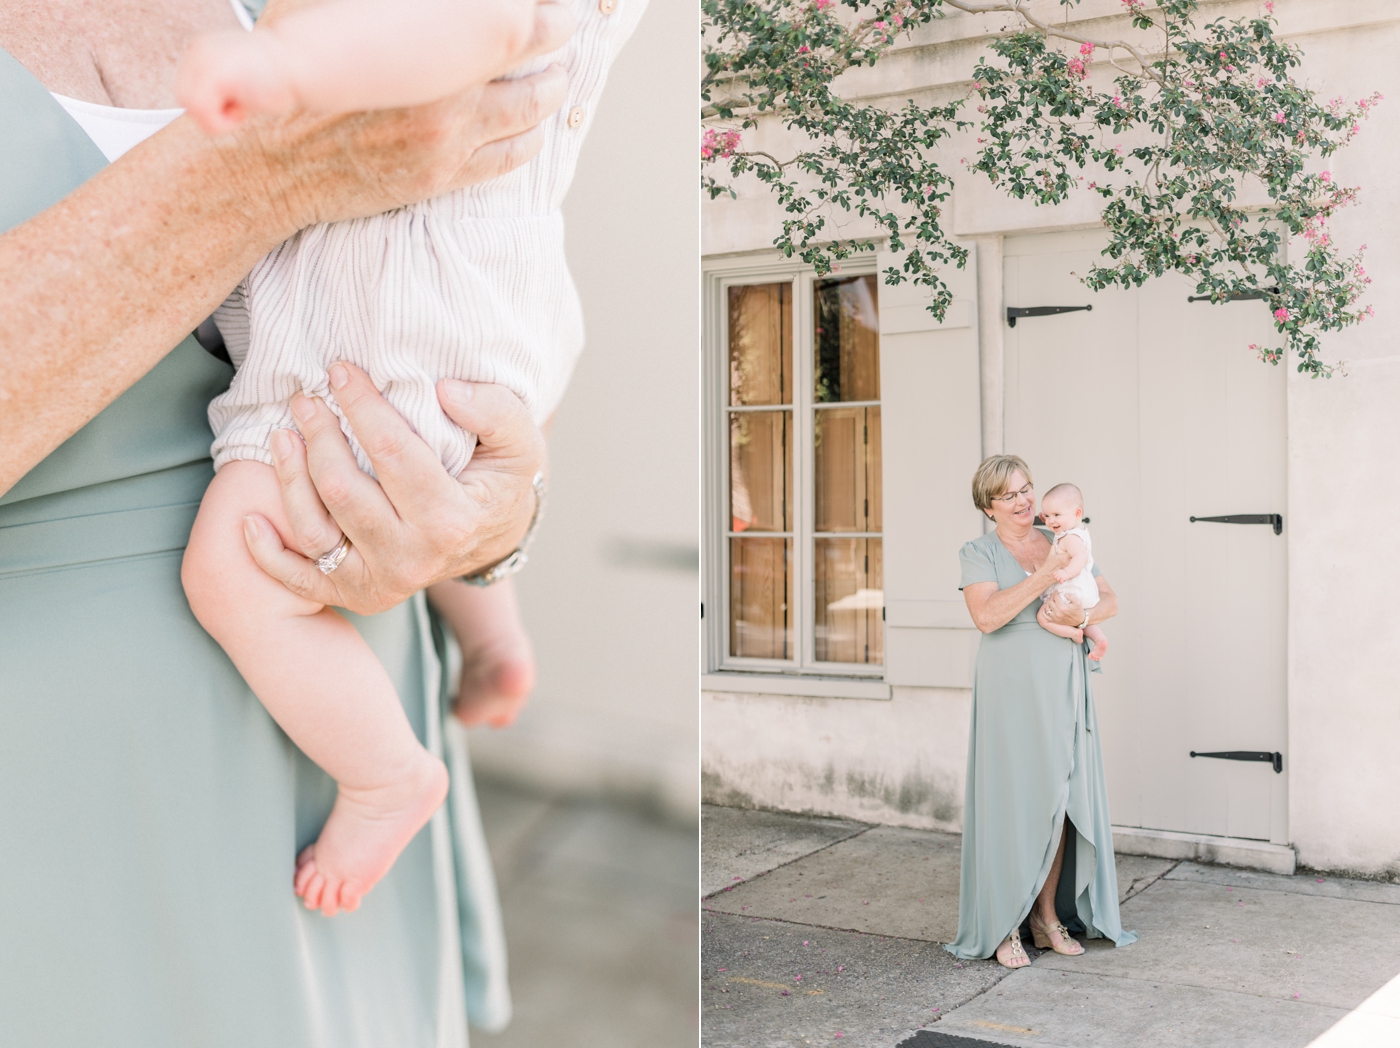 Images of grandmother with granddaughter. Photo by Caitlyn Motycka Photography.